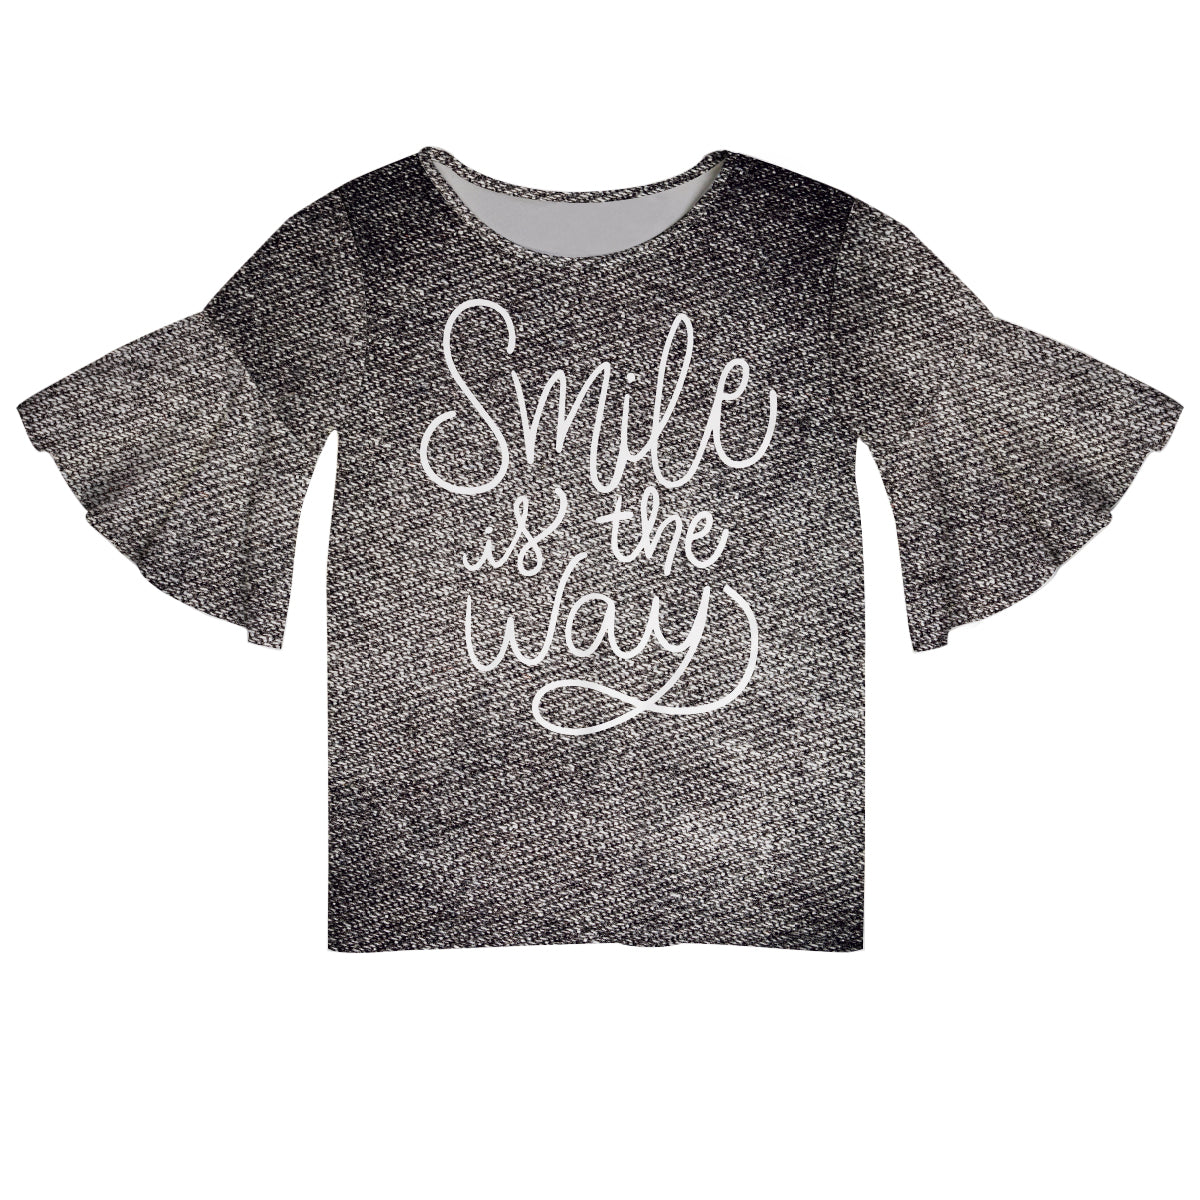 Smile Is The Way Black Denim Short Ruffle Top - Wimziy&Co.